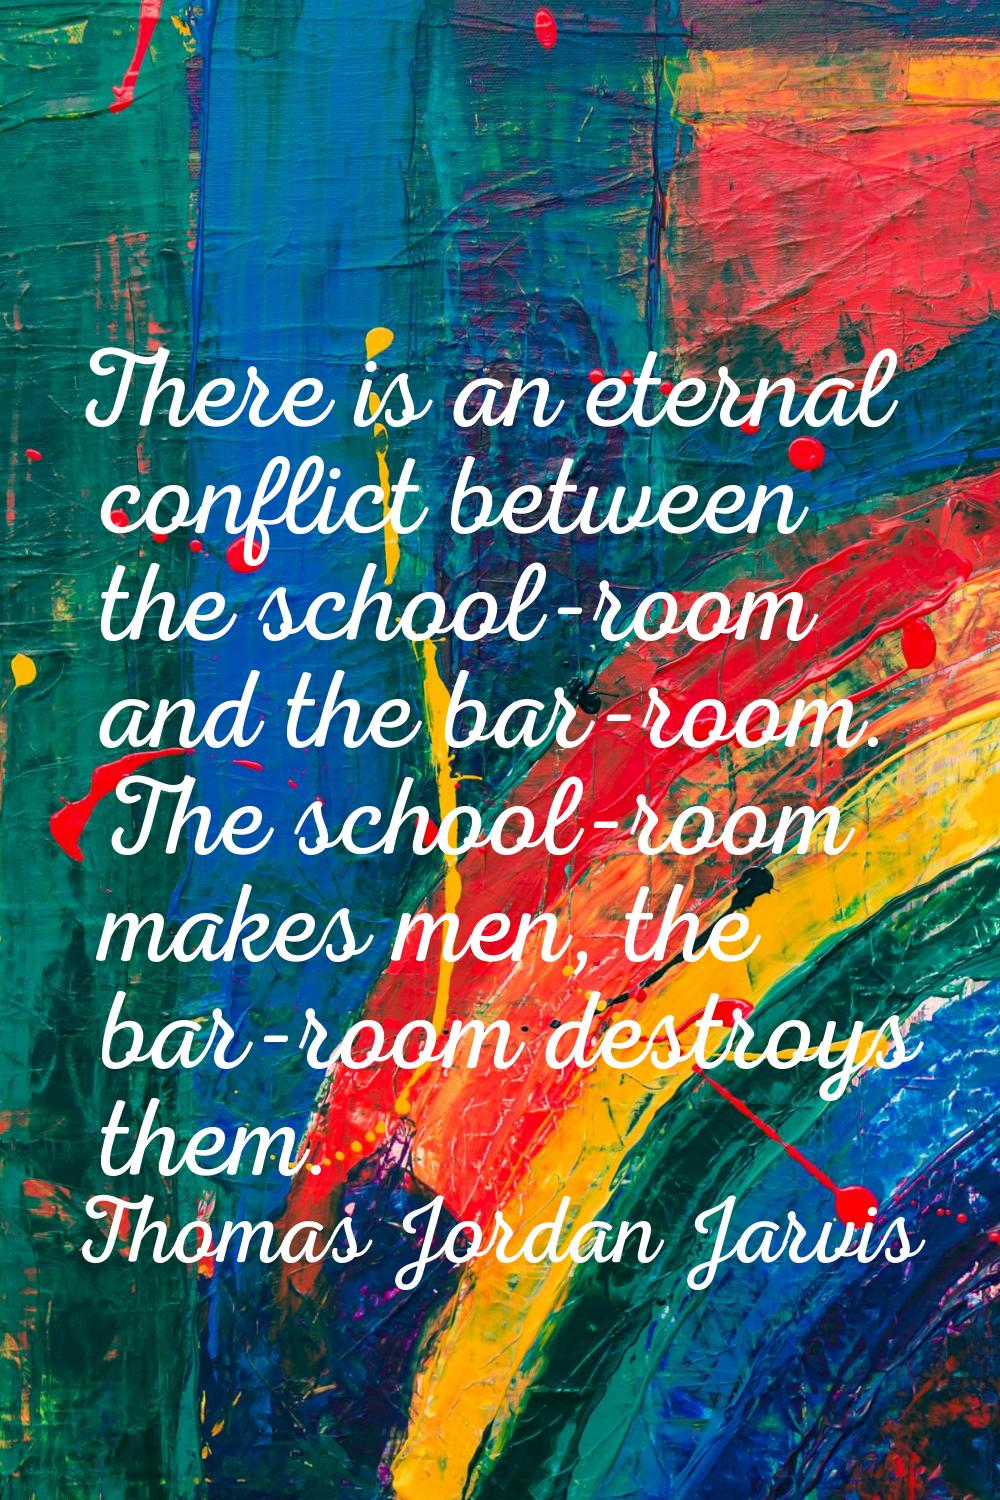 There is an eternal conflict between the school-room and the bar-room. The school-room makes men, t